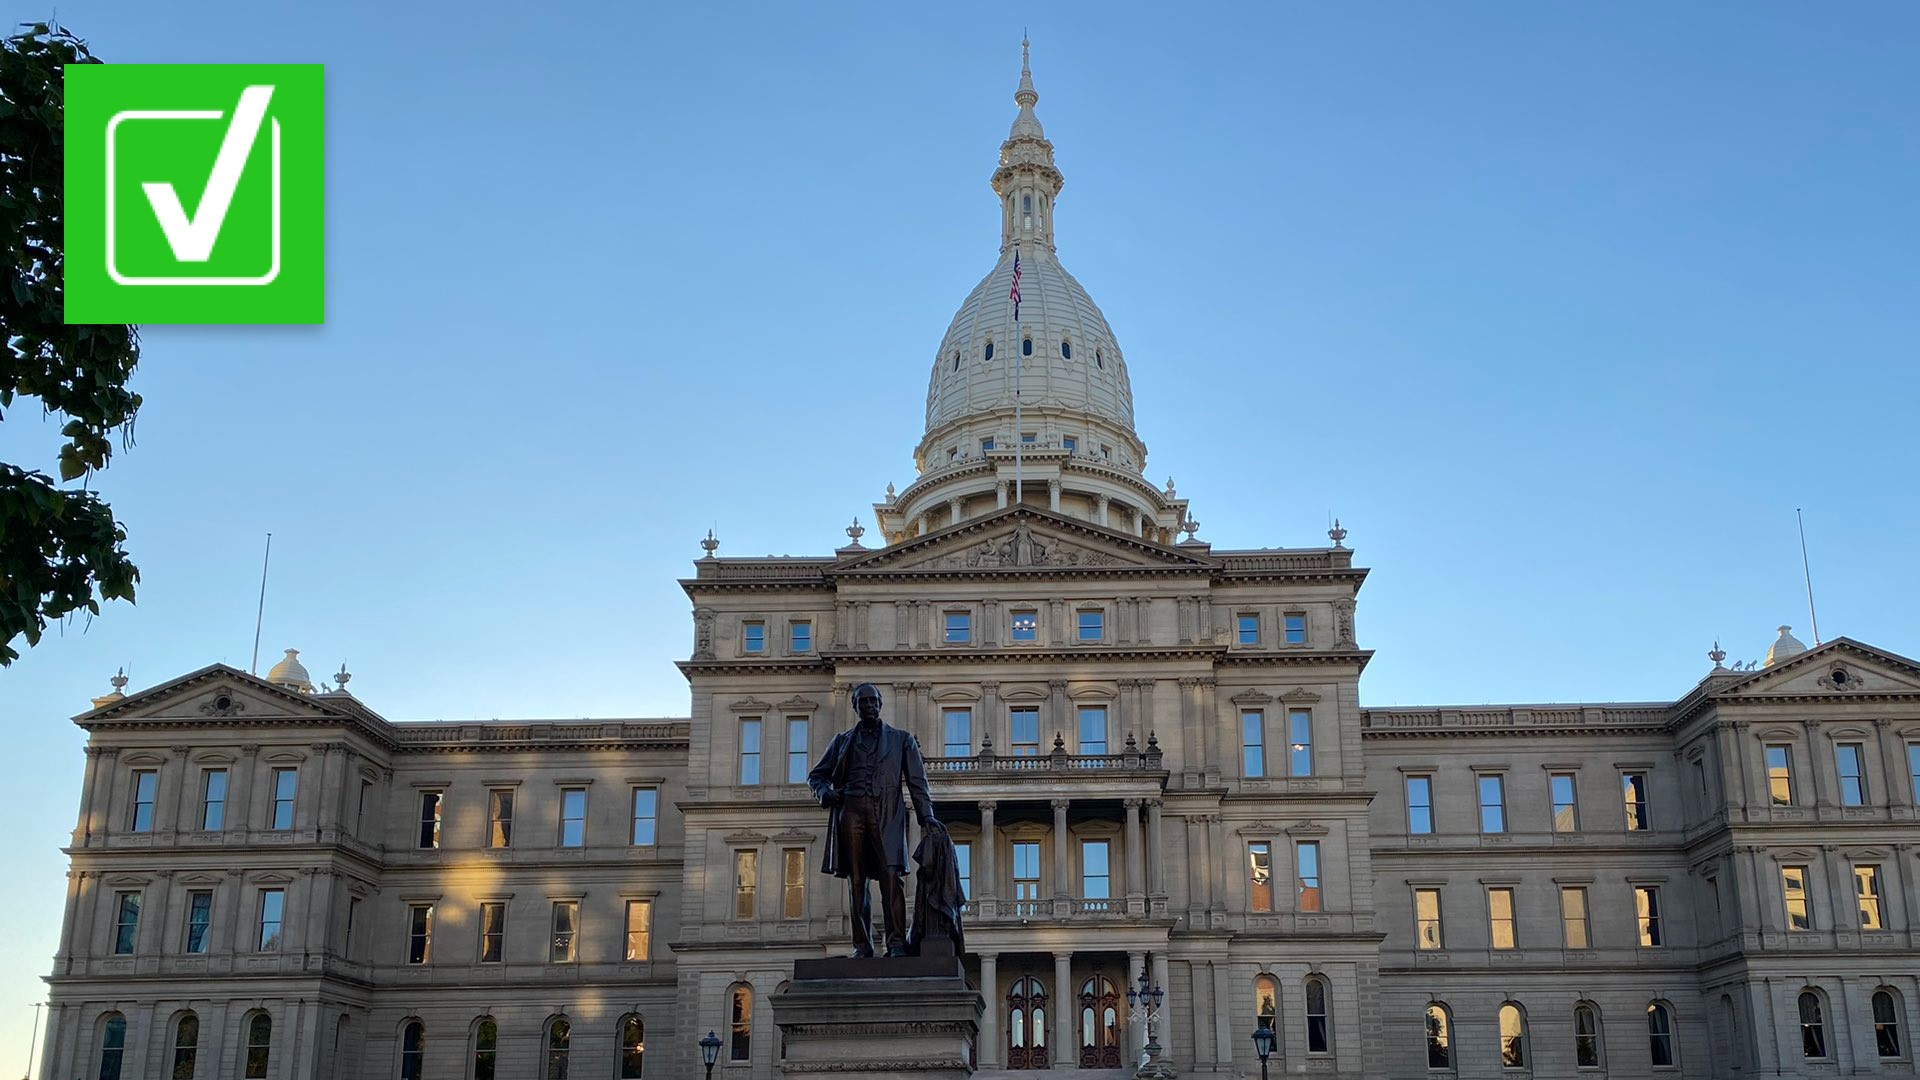 A House resolution introduced in Lansing on Monday calls for "concerted actions to find common ground on the challenges facing the people of Michigan."